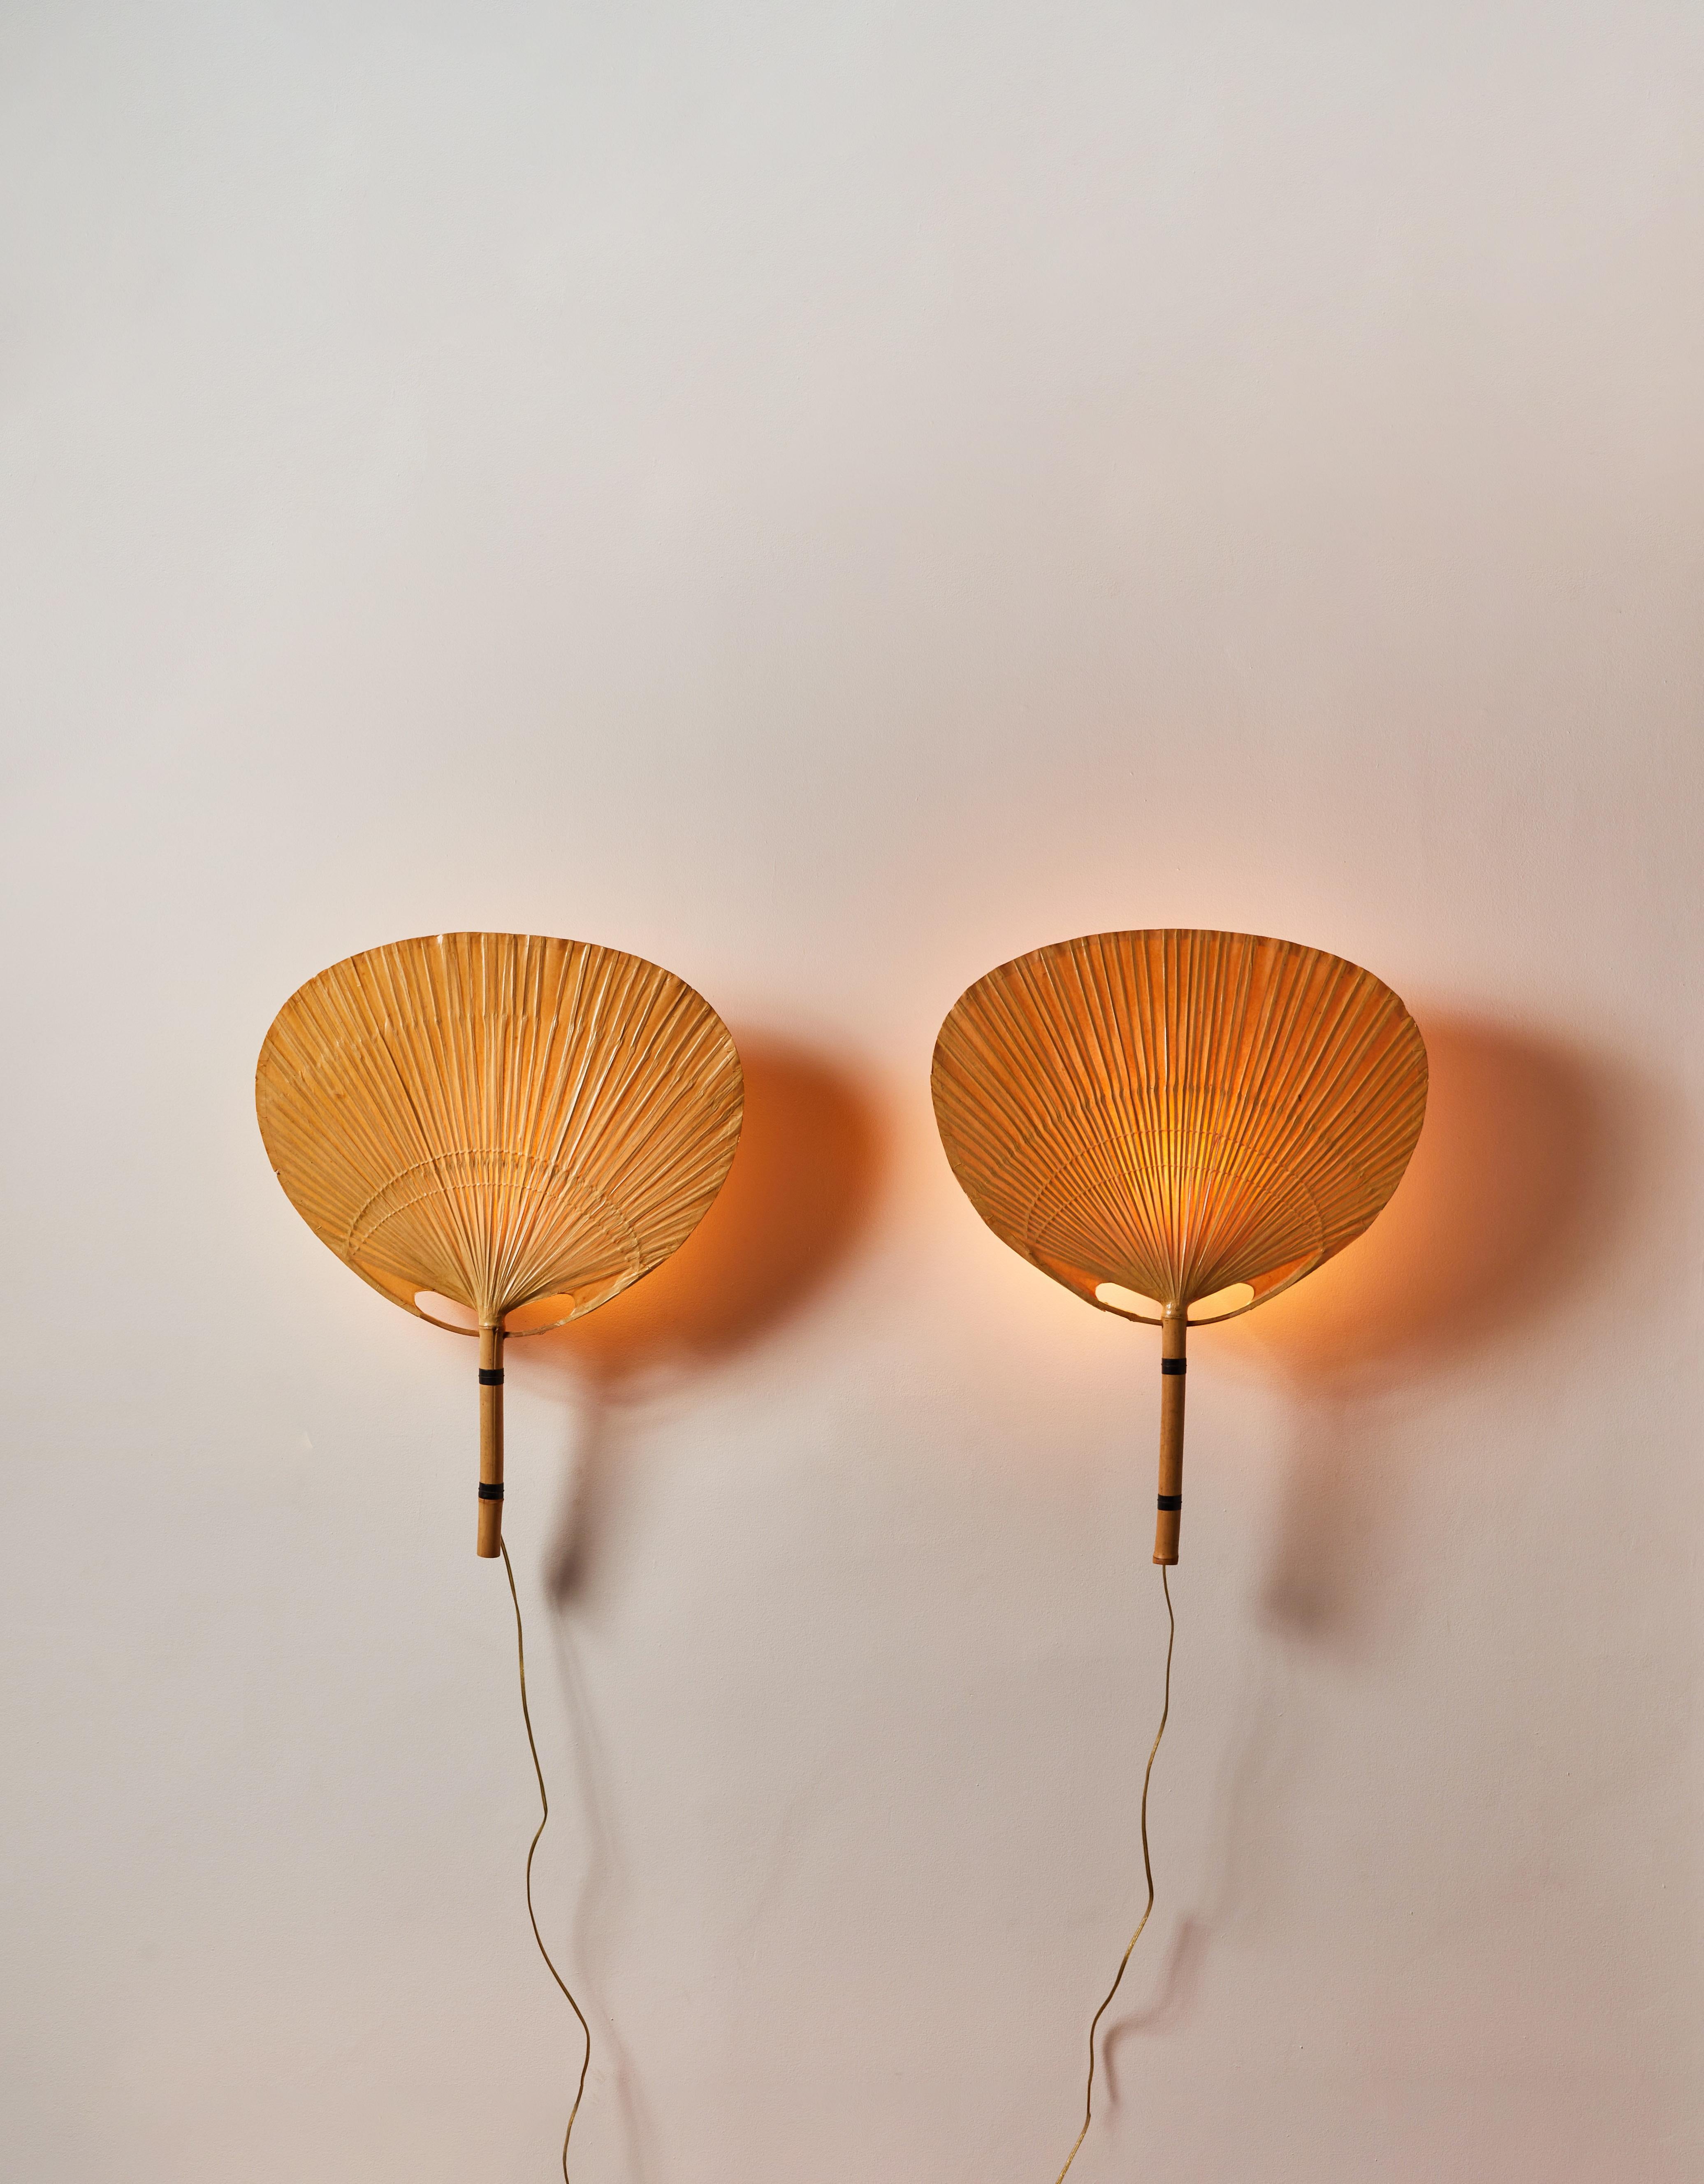 Pair of Uchiwa Sconces by Ingo Maurer. Designed and manufactured in Germany, circa 1970s. Bamboo, rice paper. Rewired for U.S. Standards. Each light takes one E27 40w maximum bulb. Bulbs provided as a one time courtesy.